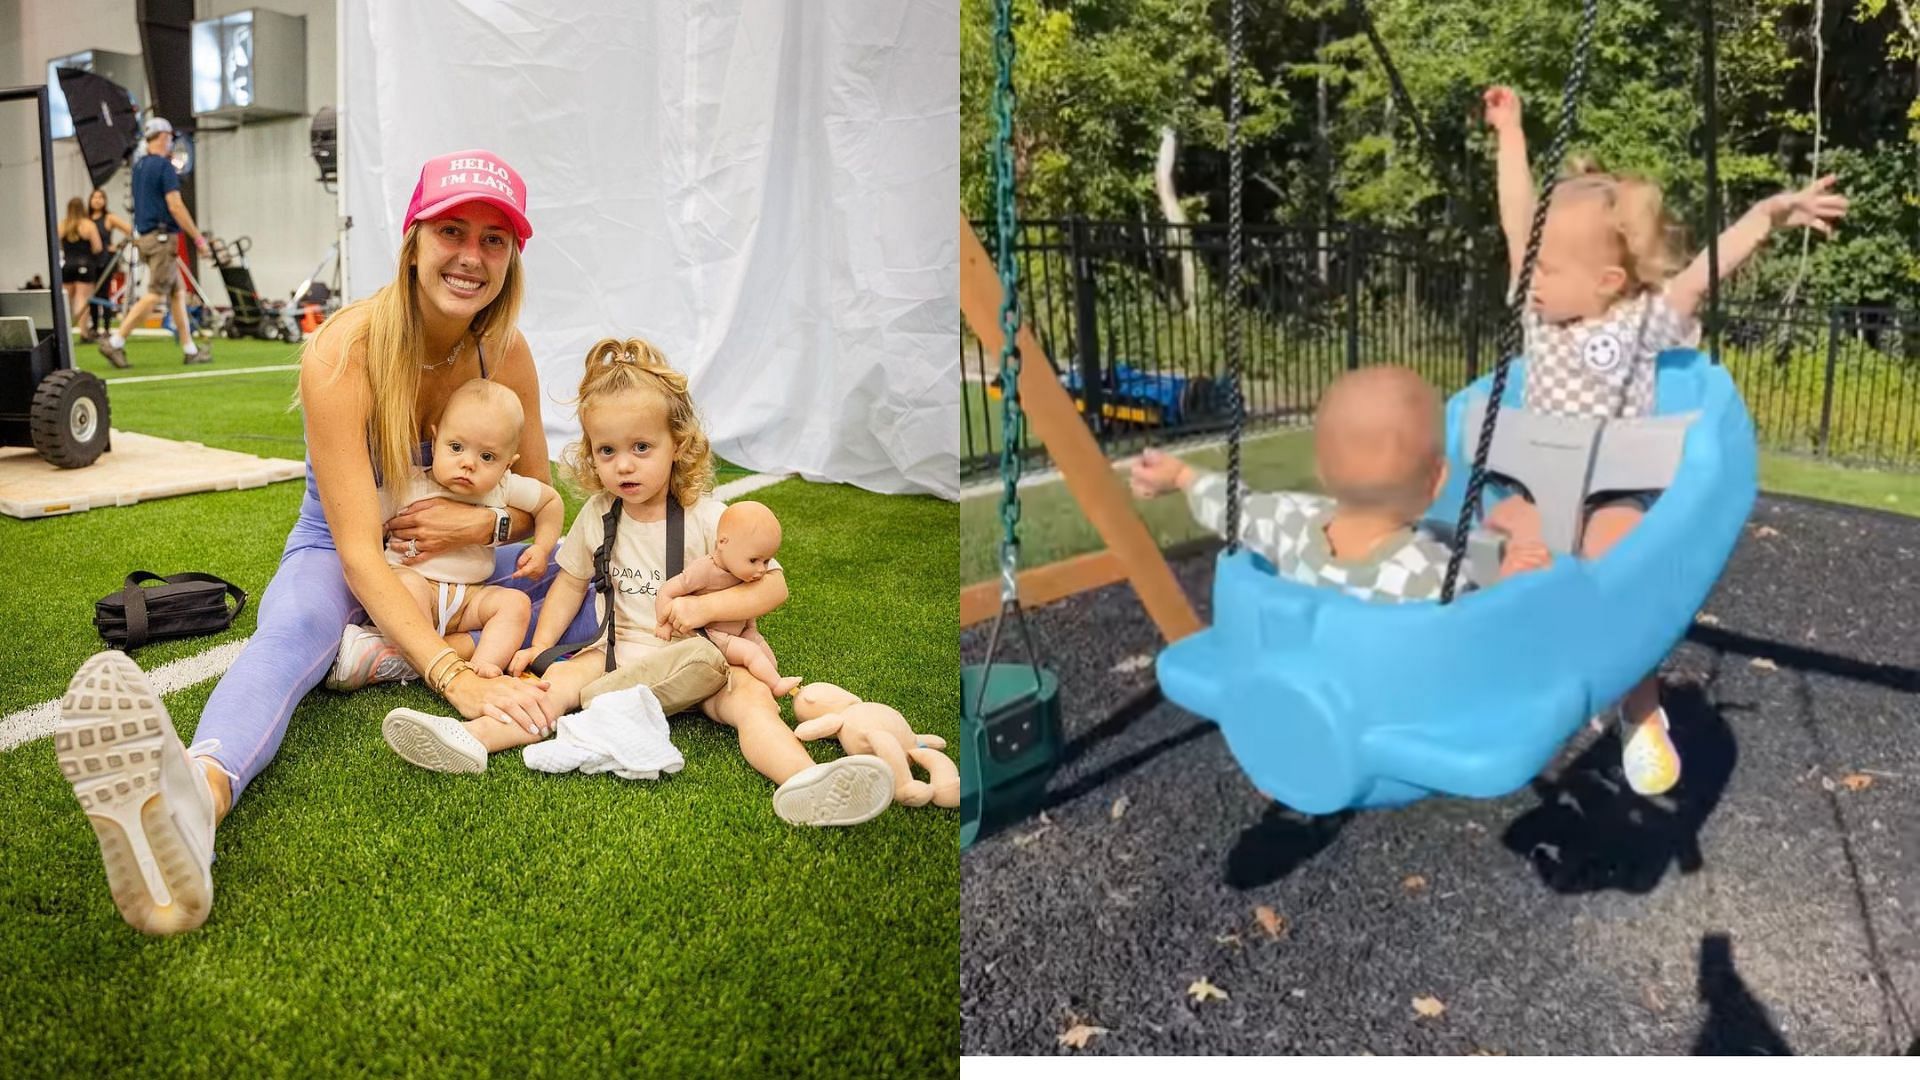 Brittany Mahomes have a fun day with her daughter and son.